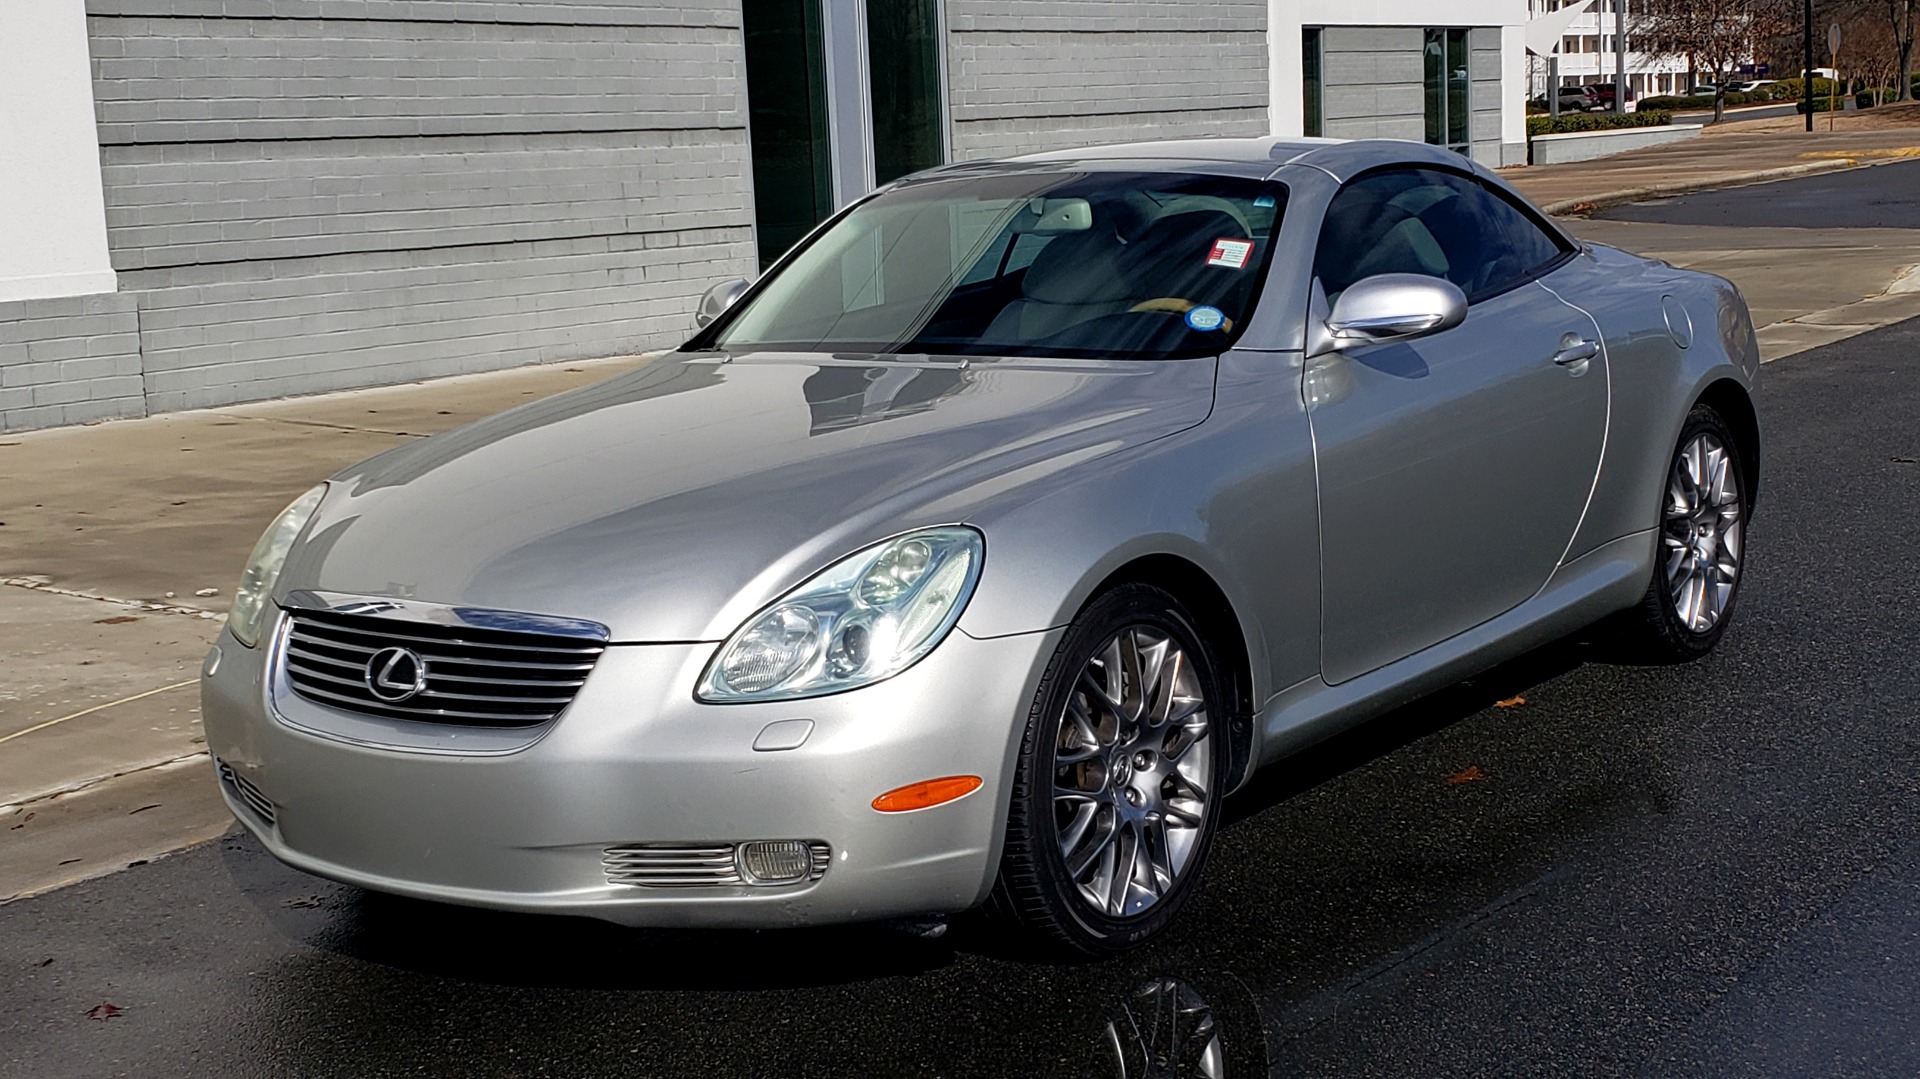 Used 2004 Lexus SC 430 CONVERTIBLE / 4.3L V8 / 5-SPD AUTO / MARK LEVINSON / 18IN WHEELS for sale Sold at Formula Imports in Charlotte NC 28227 2